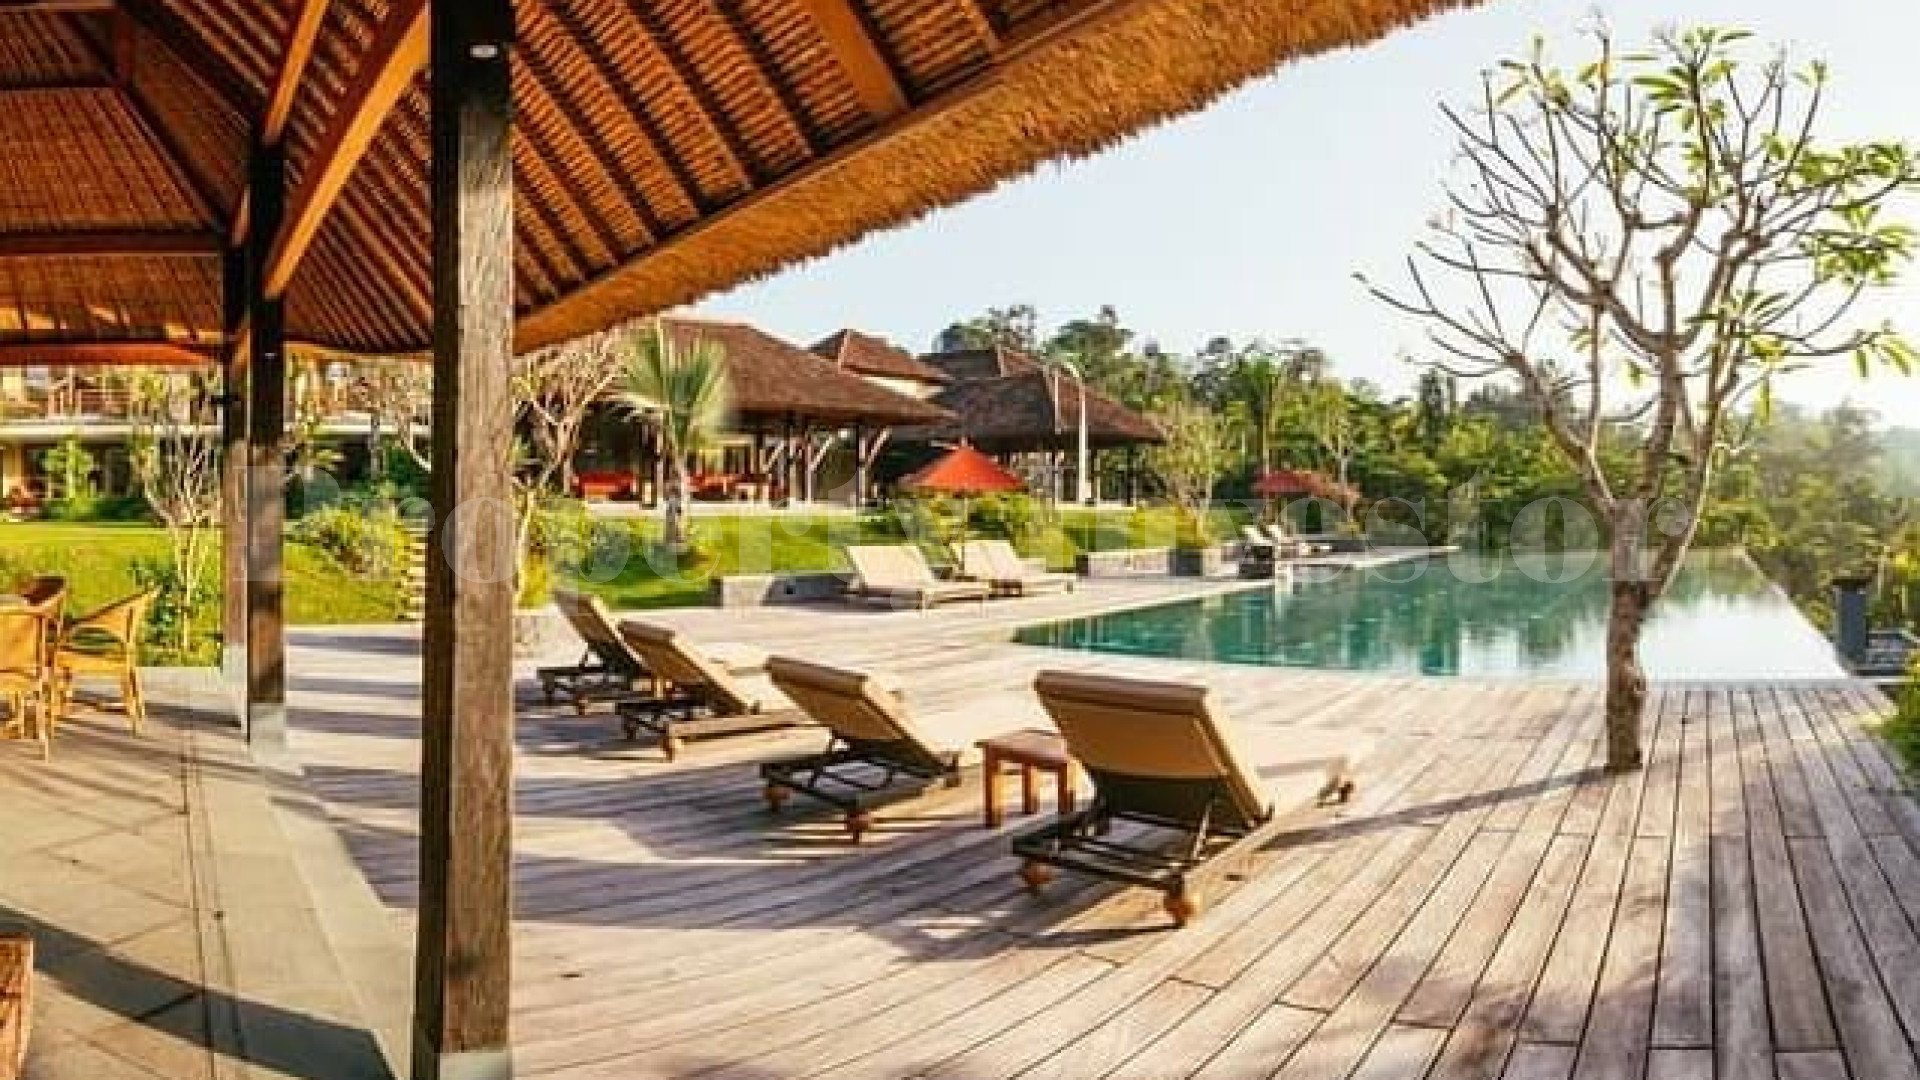 Magnificent 7 Bedroom Luxury Gated Community Estate with Horse Stables for Sale in Tabanan, Bali